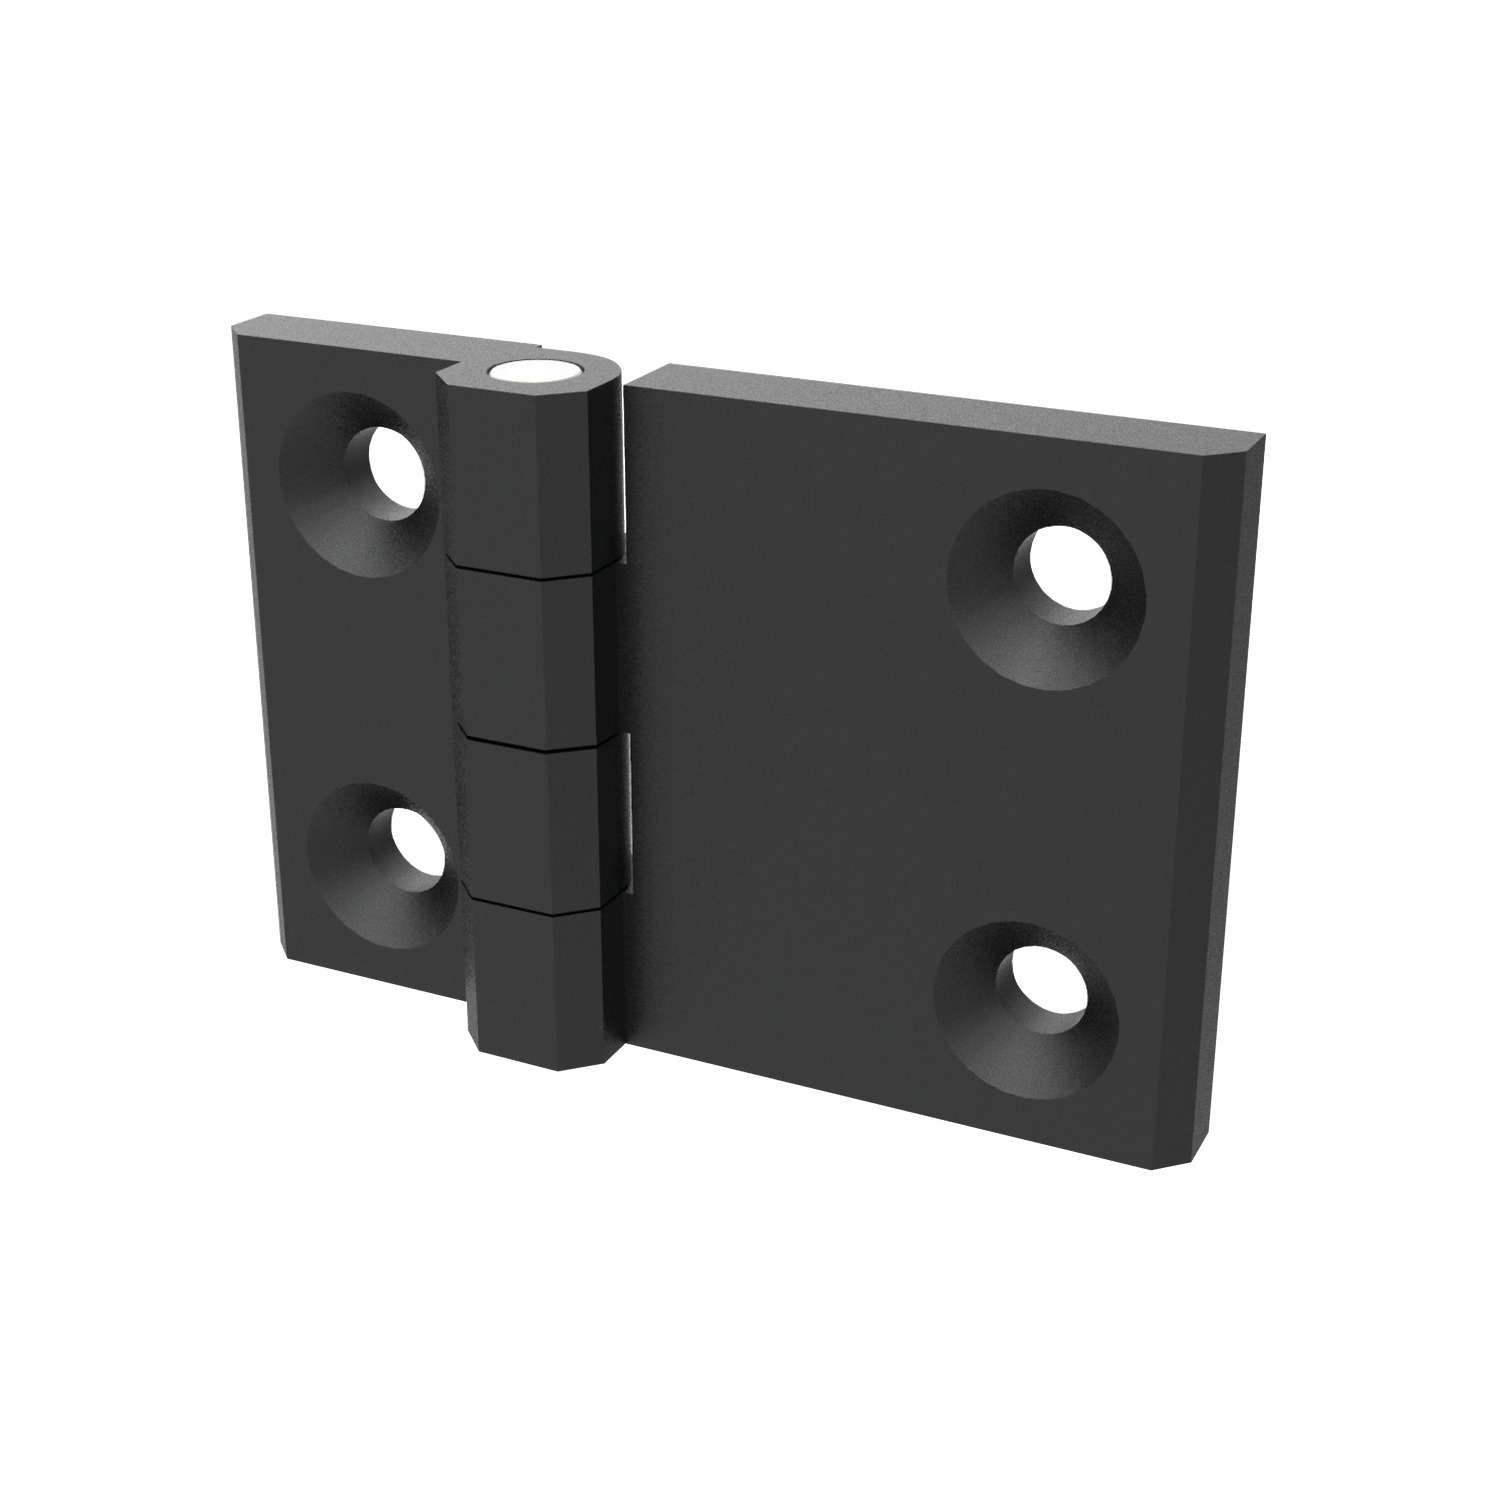 Surface Mount - Leaf Hinges Made from die cast zinc with a black powder coat, with a nickle-plated steel pin